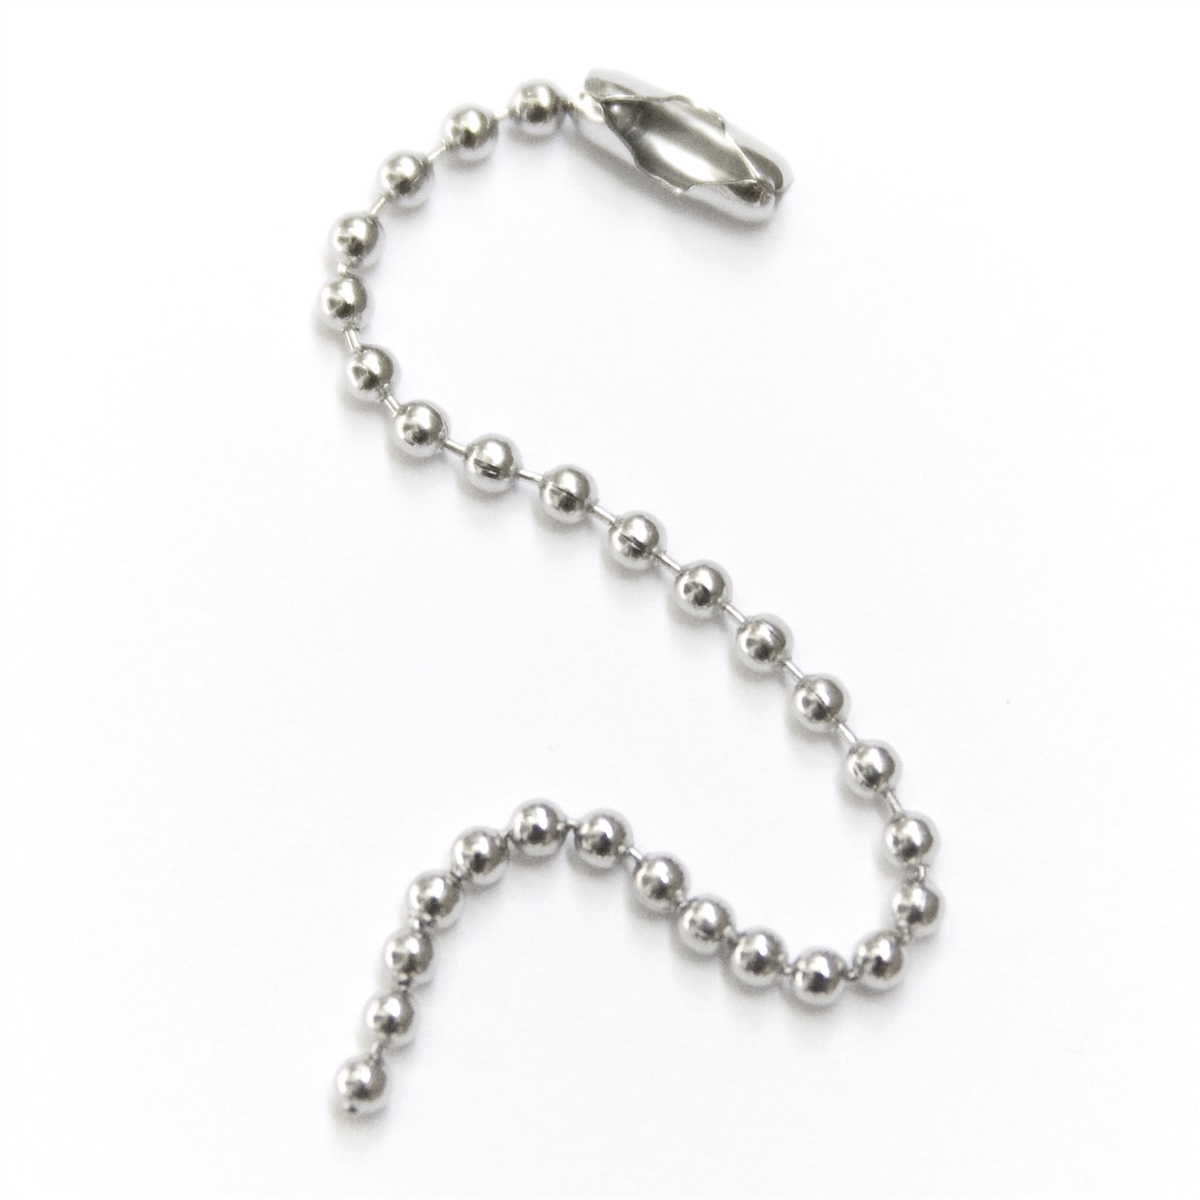 Stainless Steel Ball Chains Necklaces